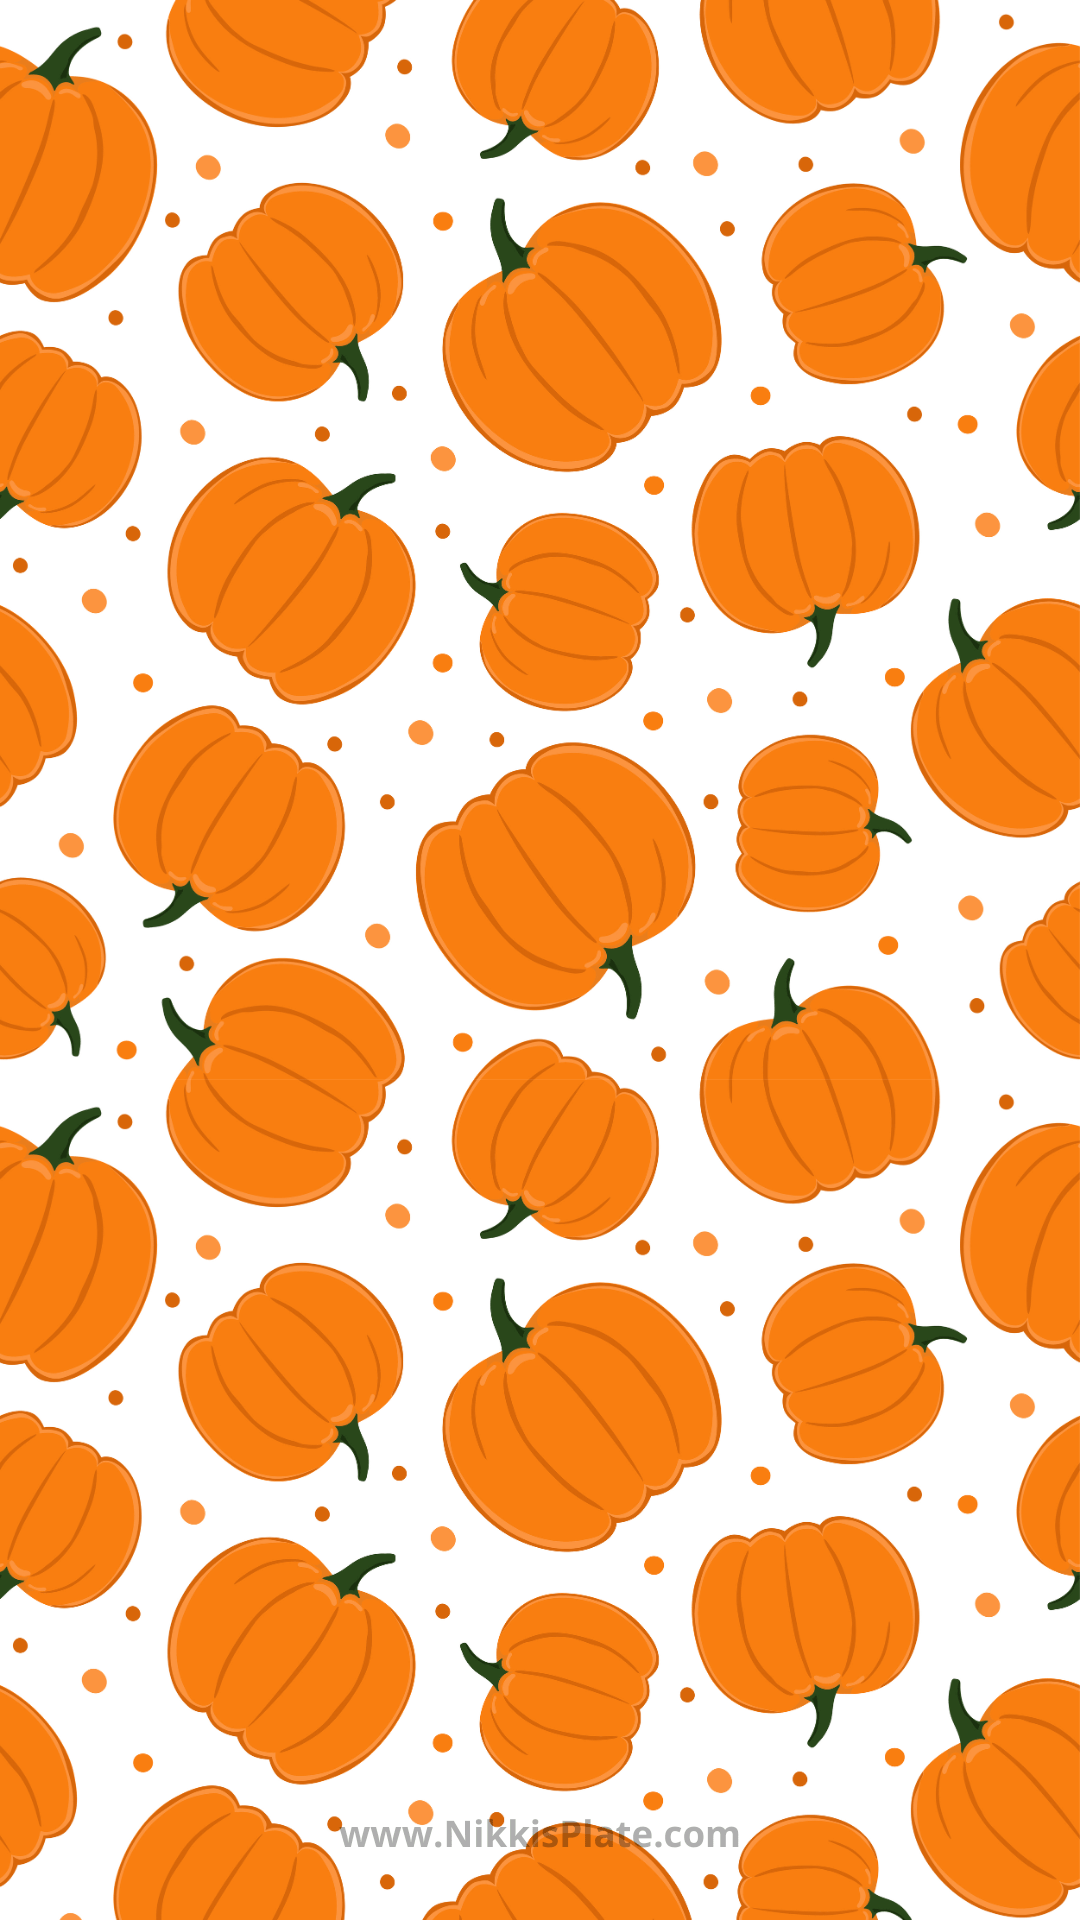 Cute Halloween iPhone Wallpaper Background (FREE DOWNLOAD)